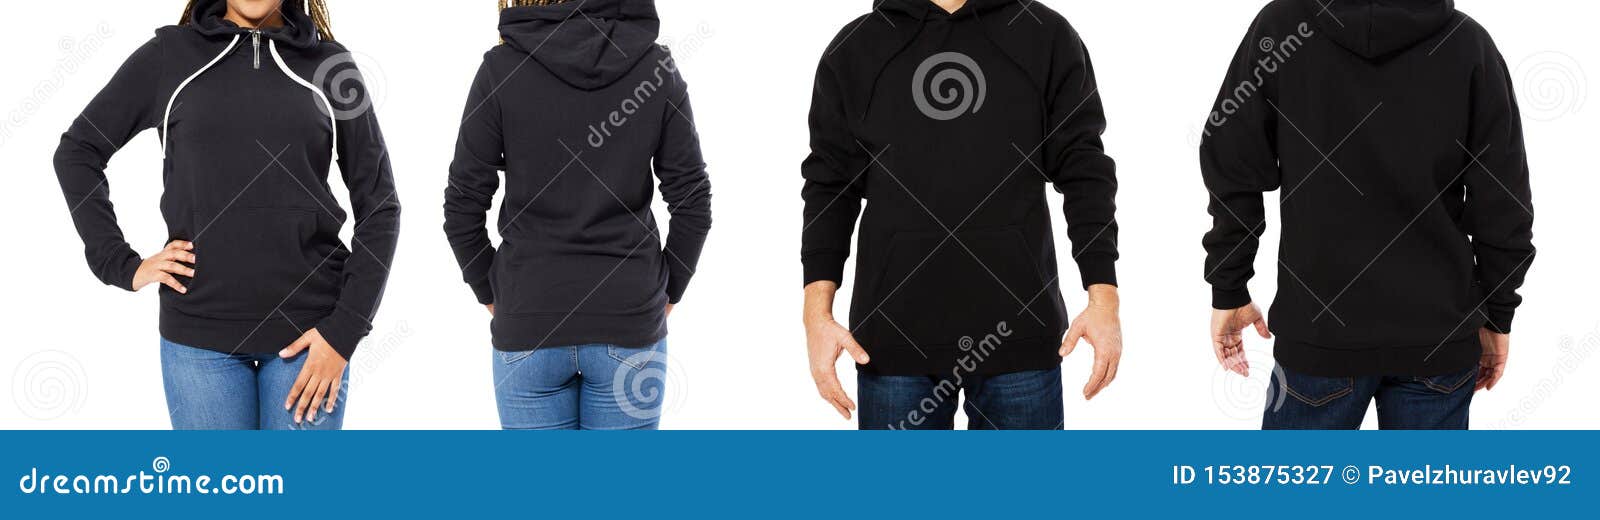 Download Set Black Hoodie Mockup Isolated Front And Back Views ...